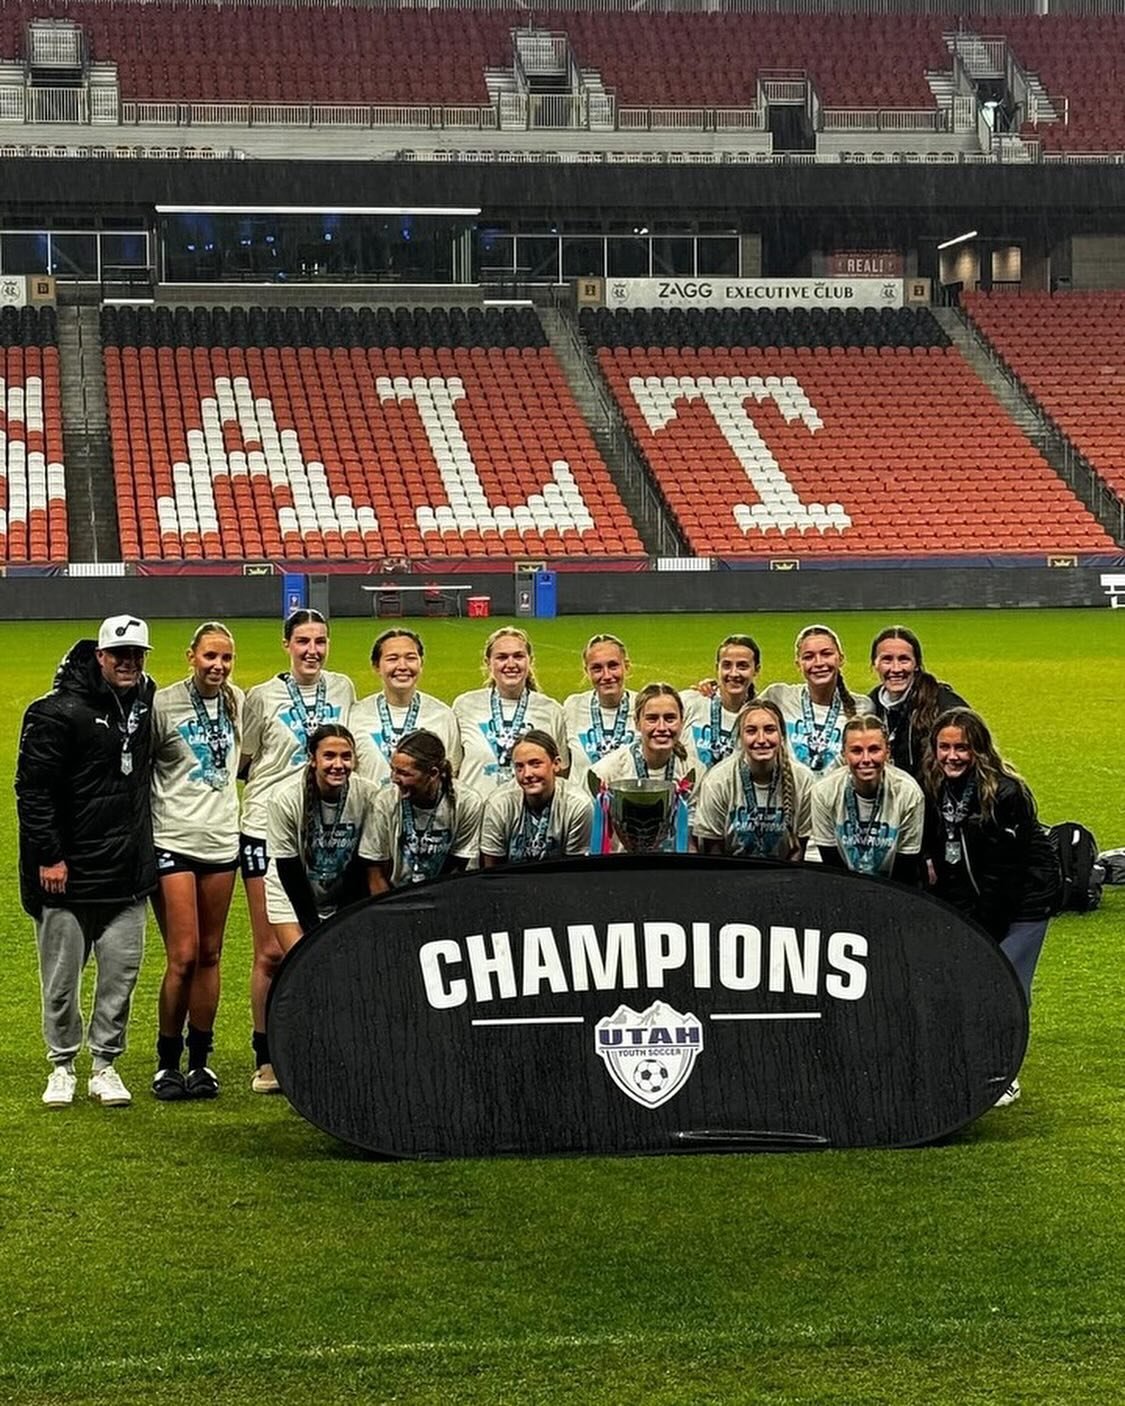 Hats off to Coach Darrin Christensen and his crew for taking home the State Cup! His Avalanche Team came out on top in a tough match against Utah Celtic, winning 2-1! We are grateful for Coach Darrin&rsquo;s expertise and talent, we&rsquo;re thrilled